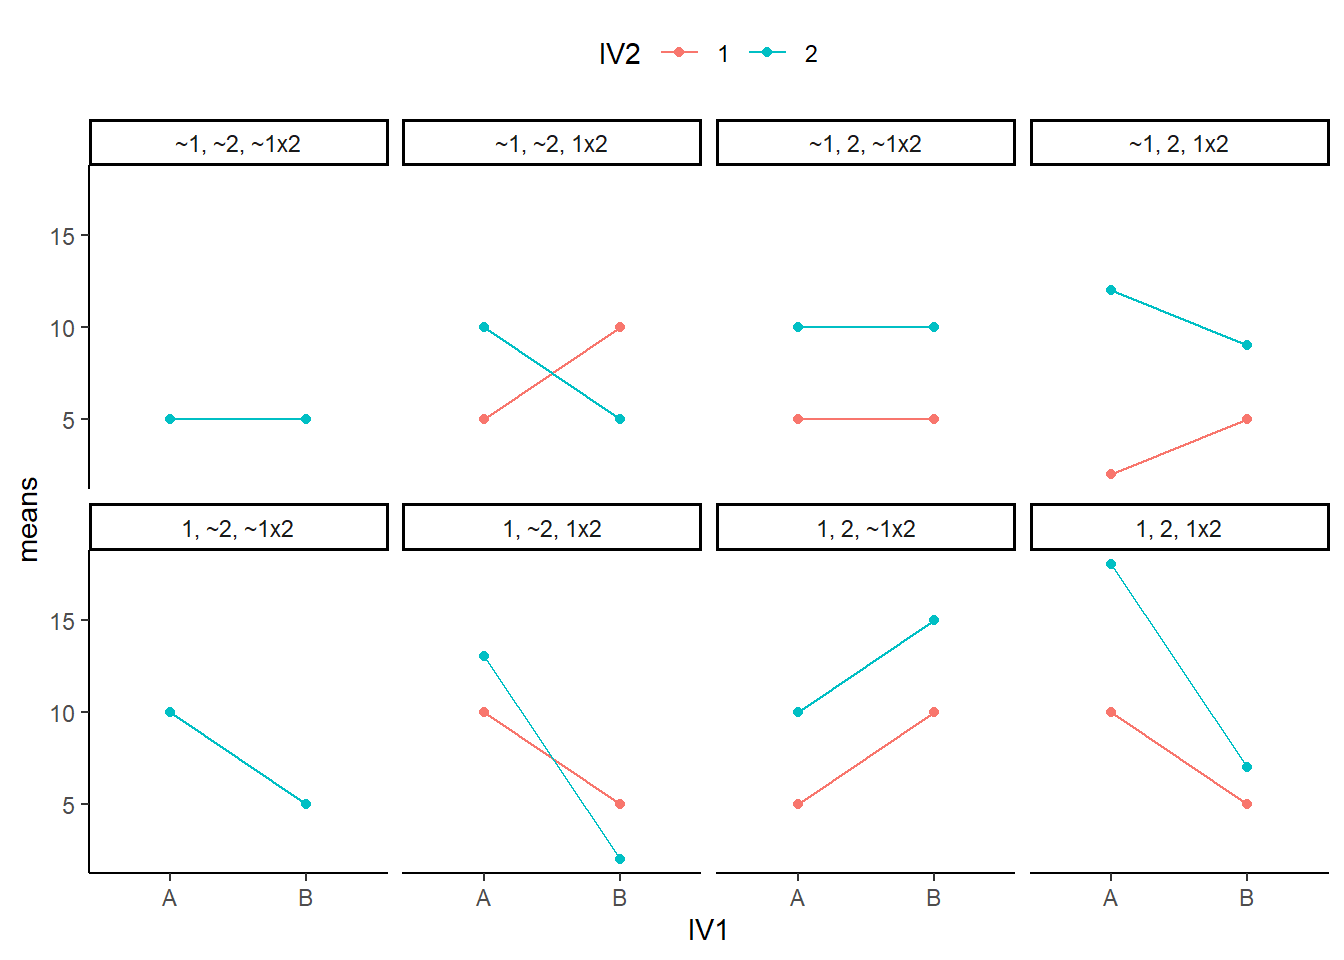 Line graphs showing 8 possible general outcomes for a 2x2 design